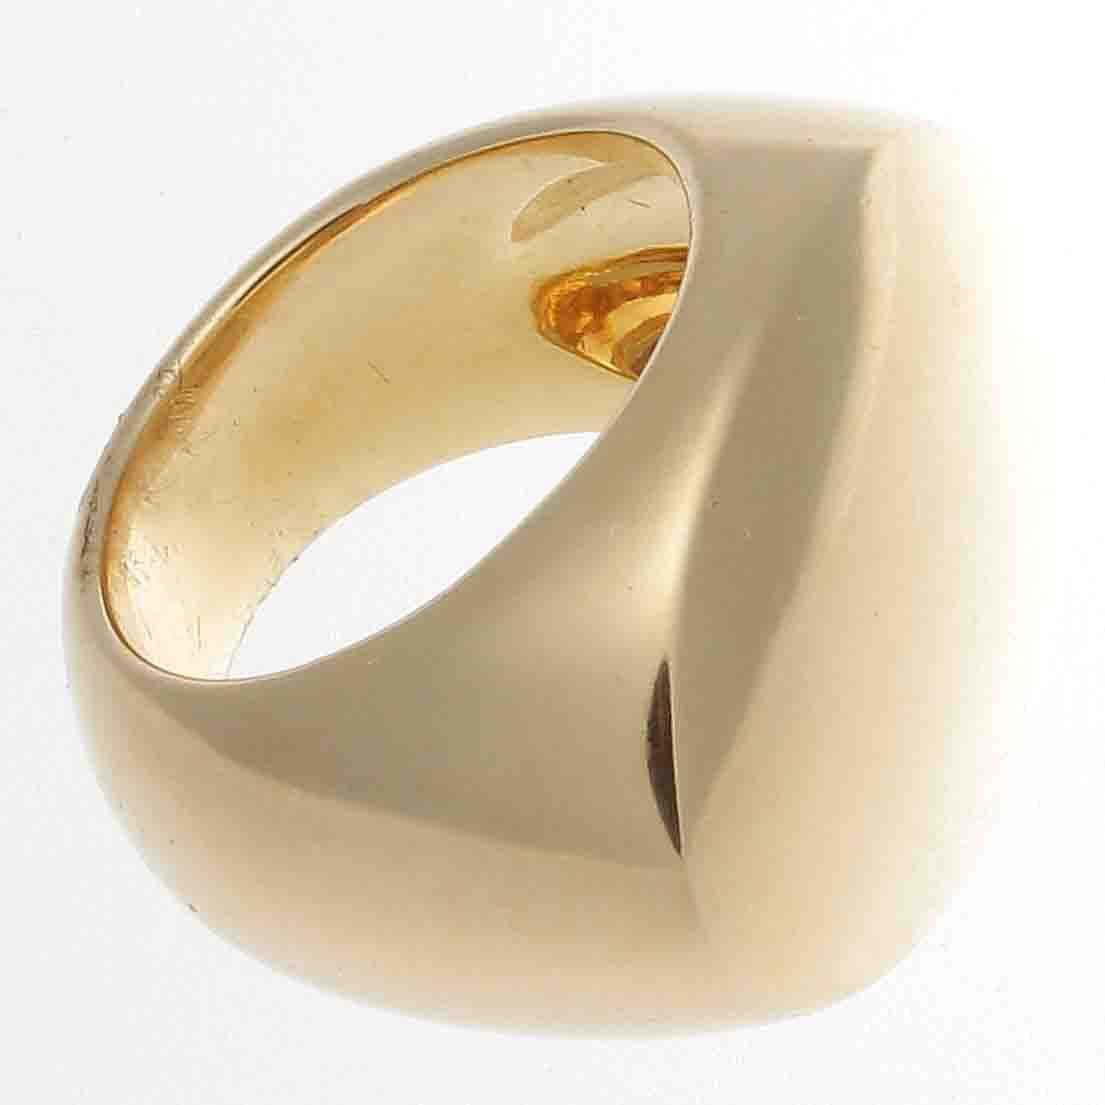 Synonymous with creativity and color, Pomellato's bold trendsetting designs created a new philosophy to the traditionally conservative world of jewelry. Swooping lines of fine Italian 18k gold commence to create this large cocktail ring. Signed